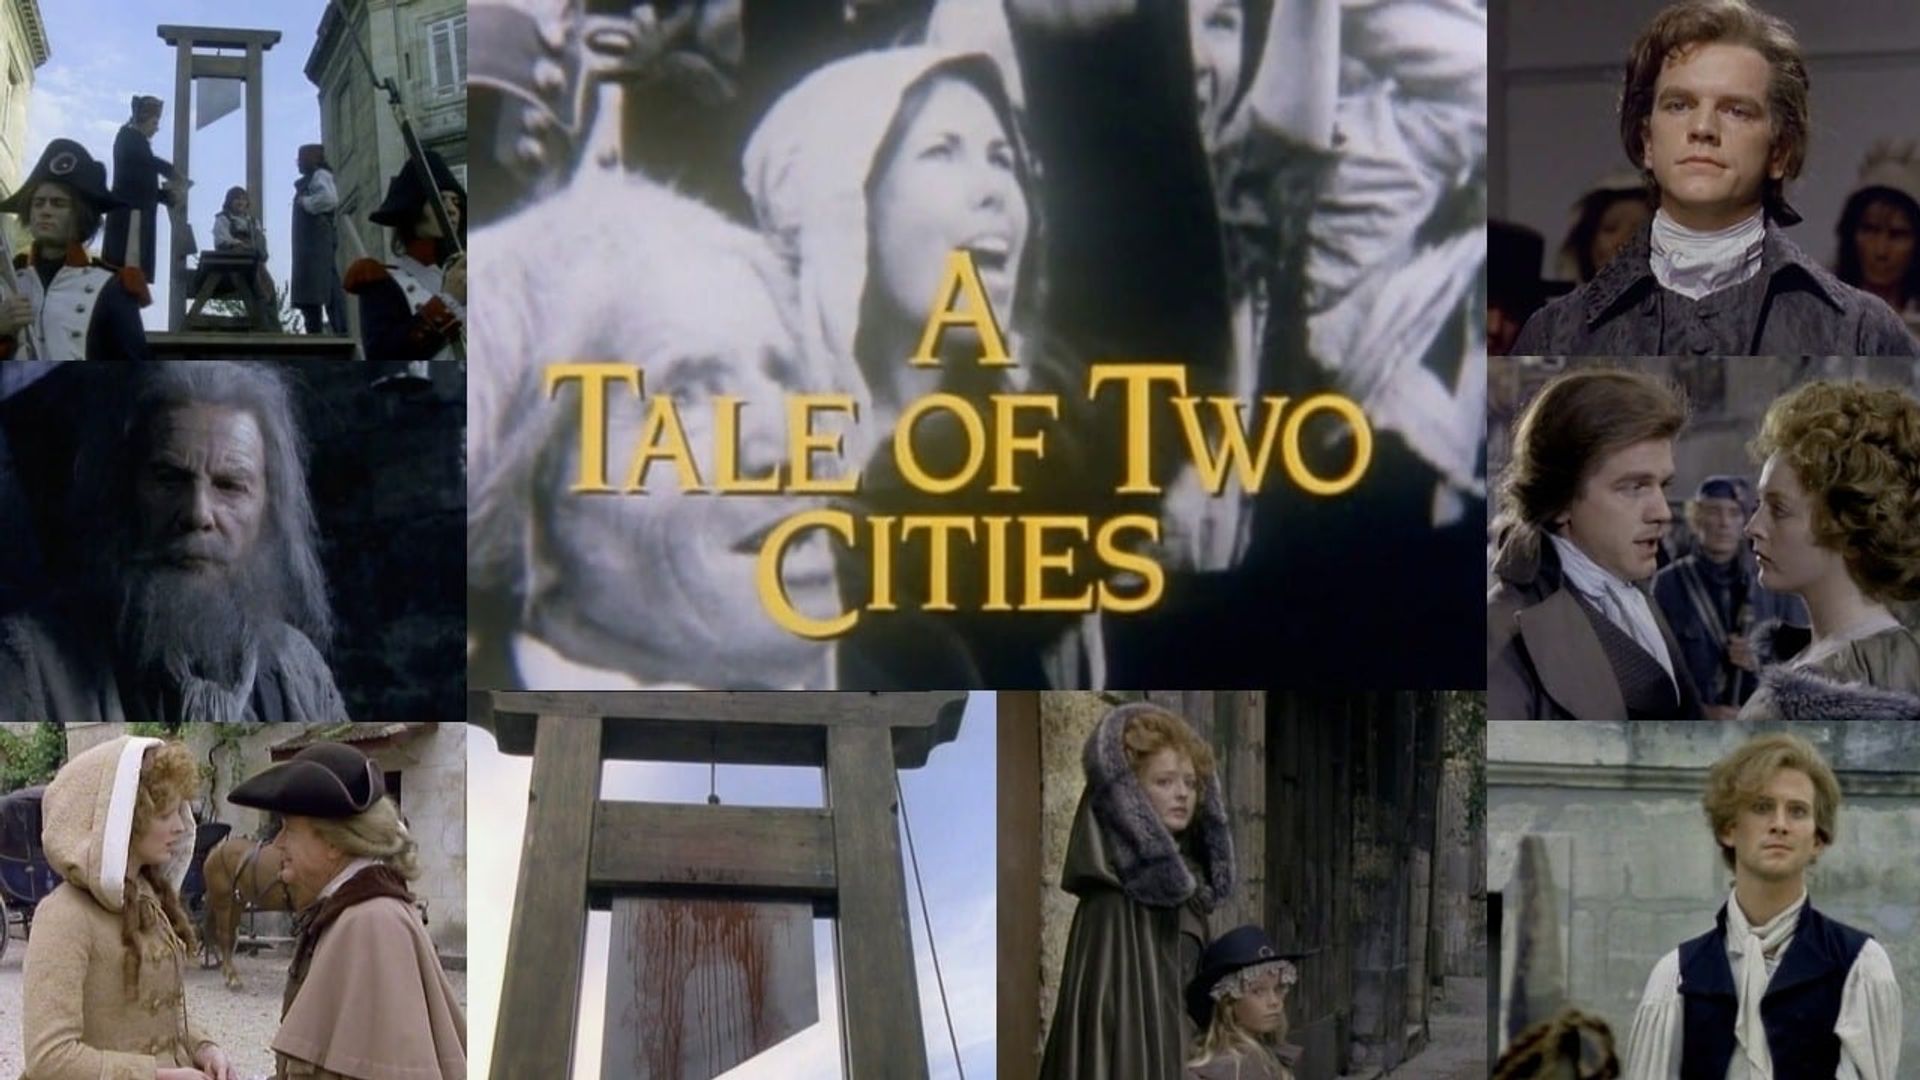 A Tale of Two Cities background